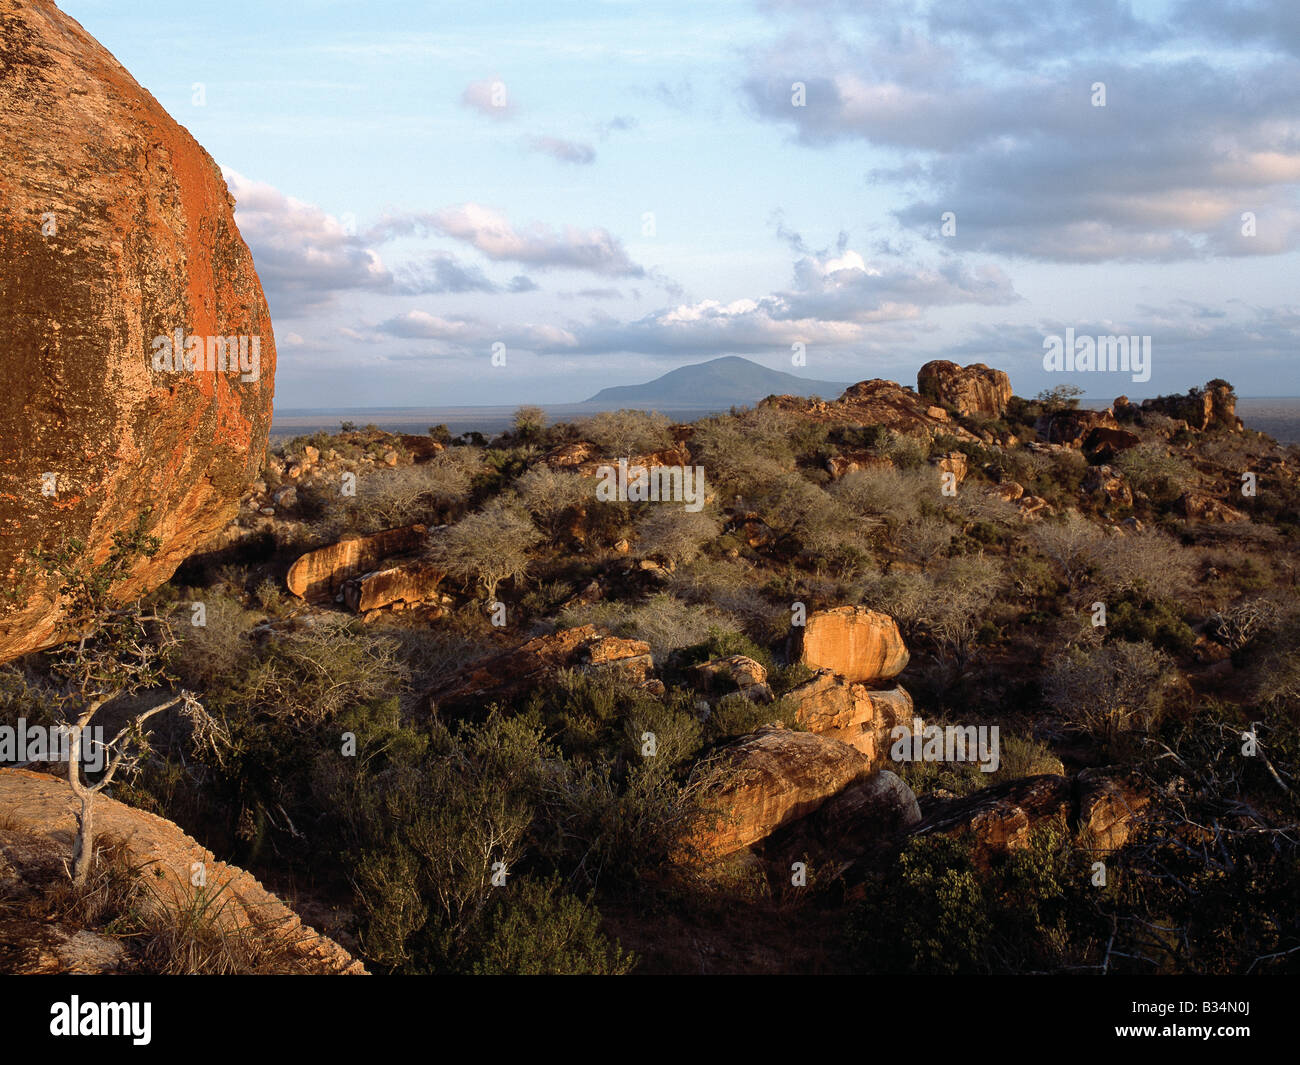 Kenya, Voi, Taita. Huge granite boulders take on a beautiful hue in the late afternoon sun. Kasigau hill rises from the arid plains in the background. Stock Photo